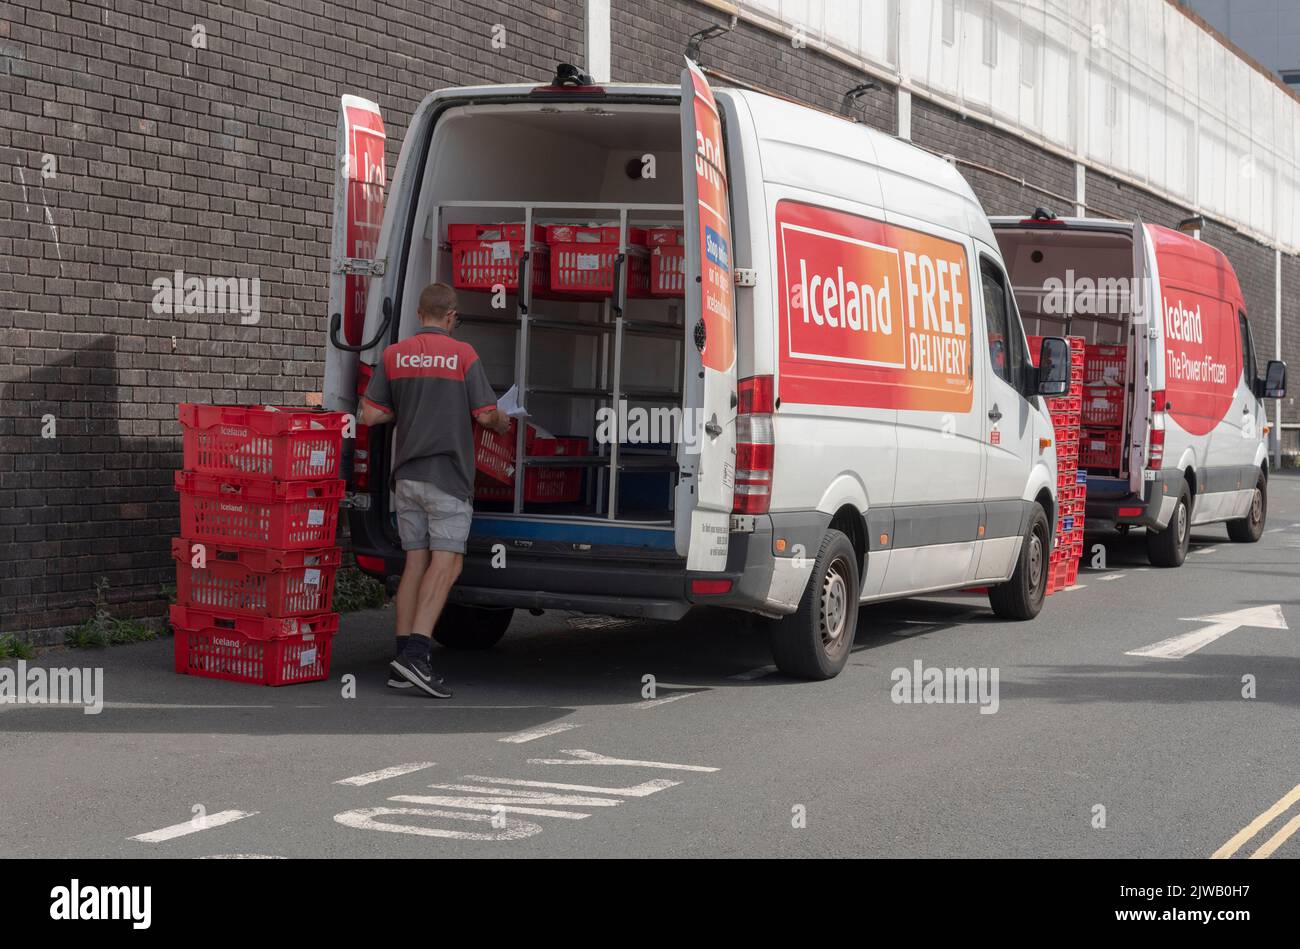 Plymouth, Devon, England, UK. 2022. Grocery and food delivery van being loaded with red plastic boxes by a delivery driver. Stock Photo